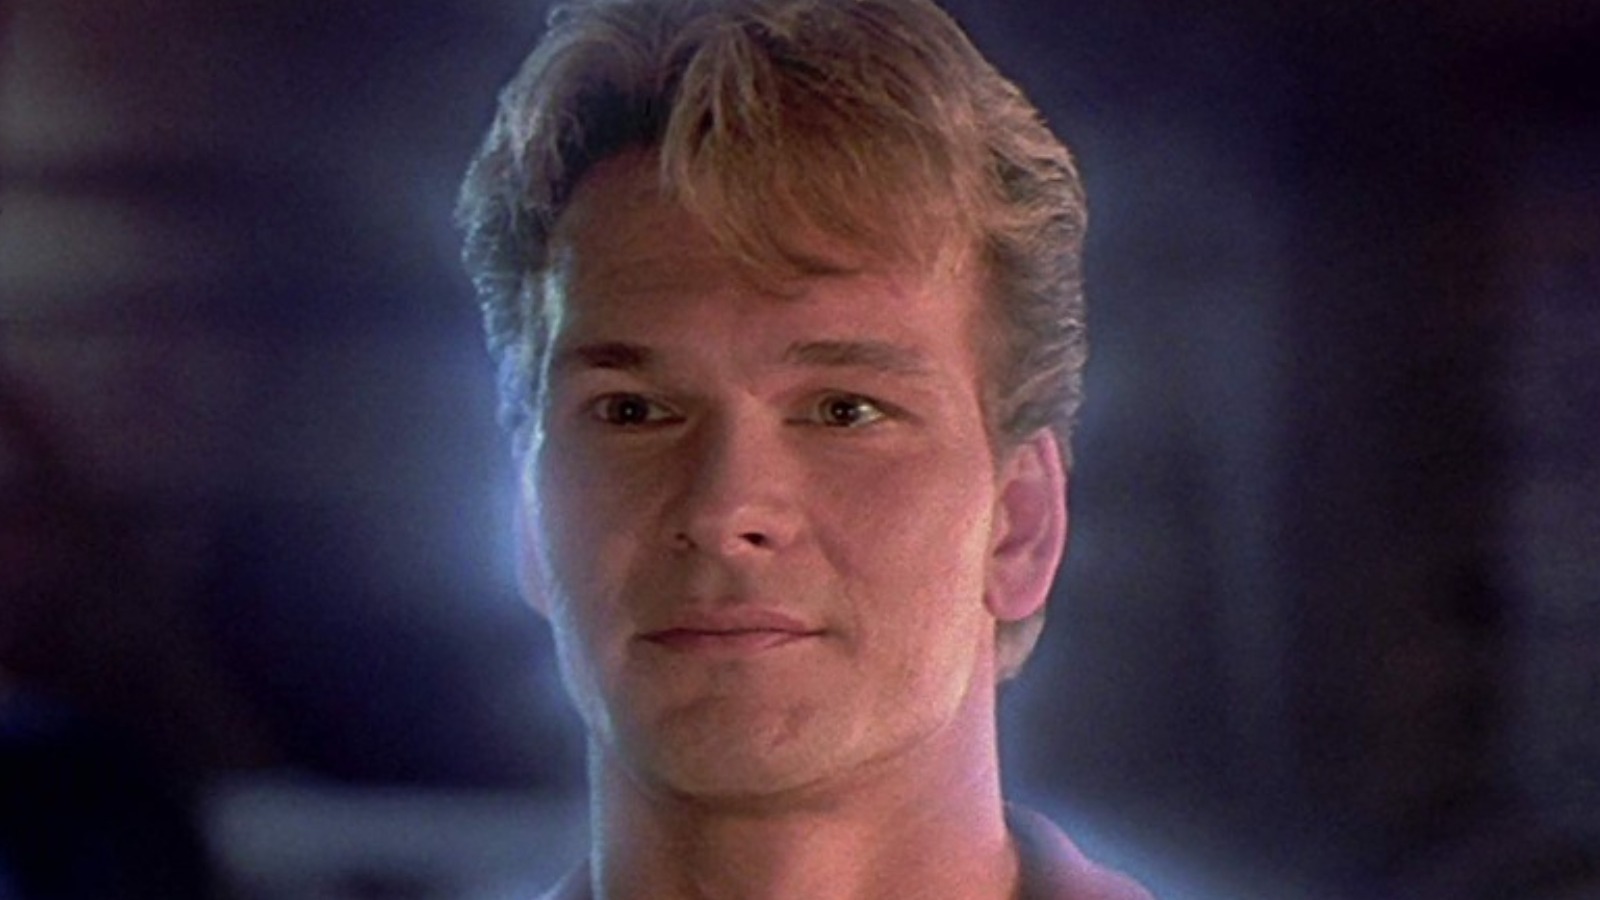 Patrick Swayze as Sam in Ghost: On the Other Side of Life (Reproduction)